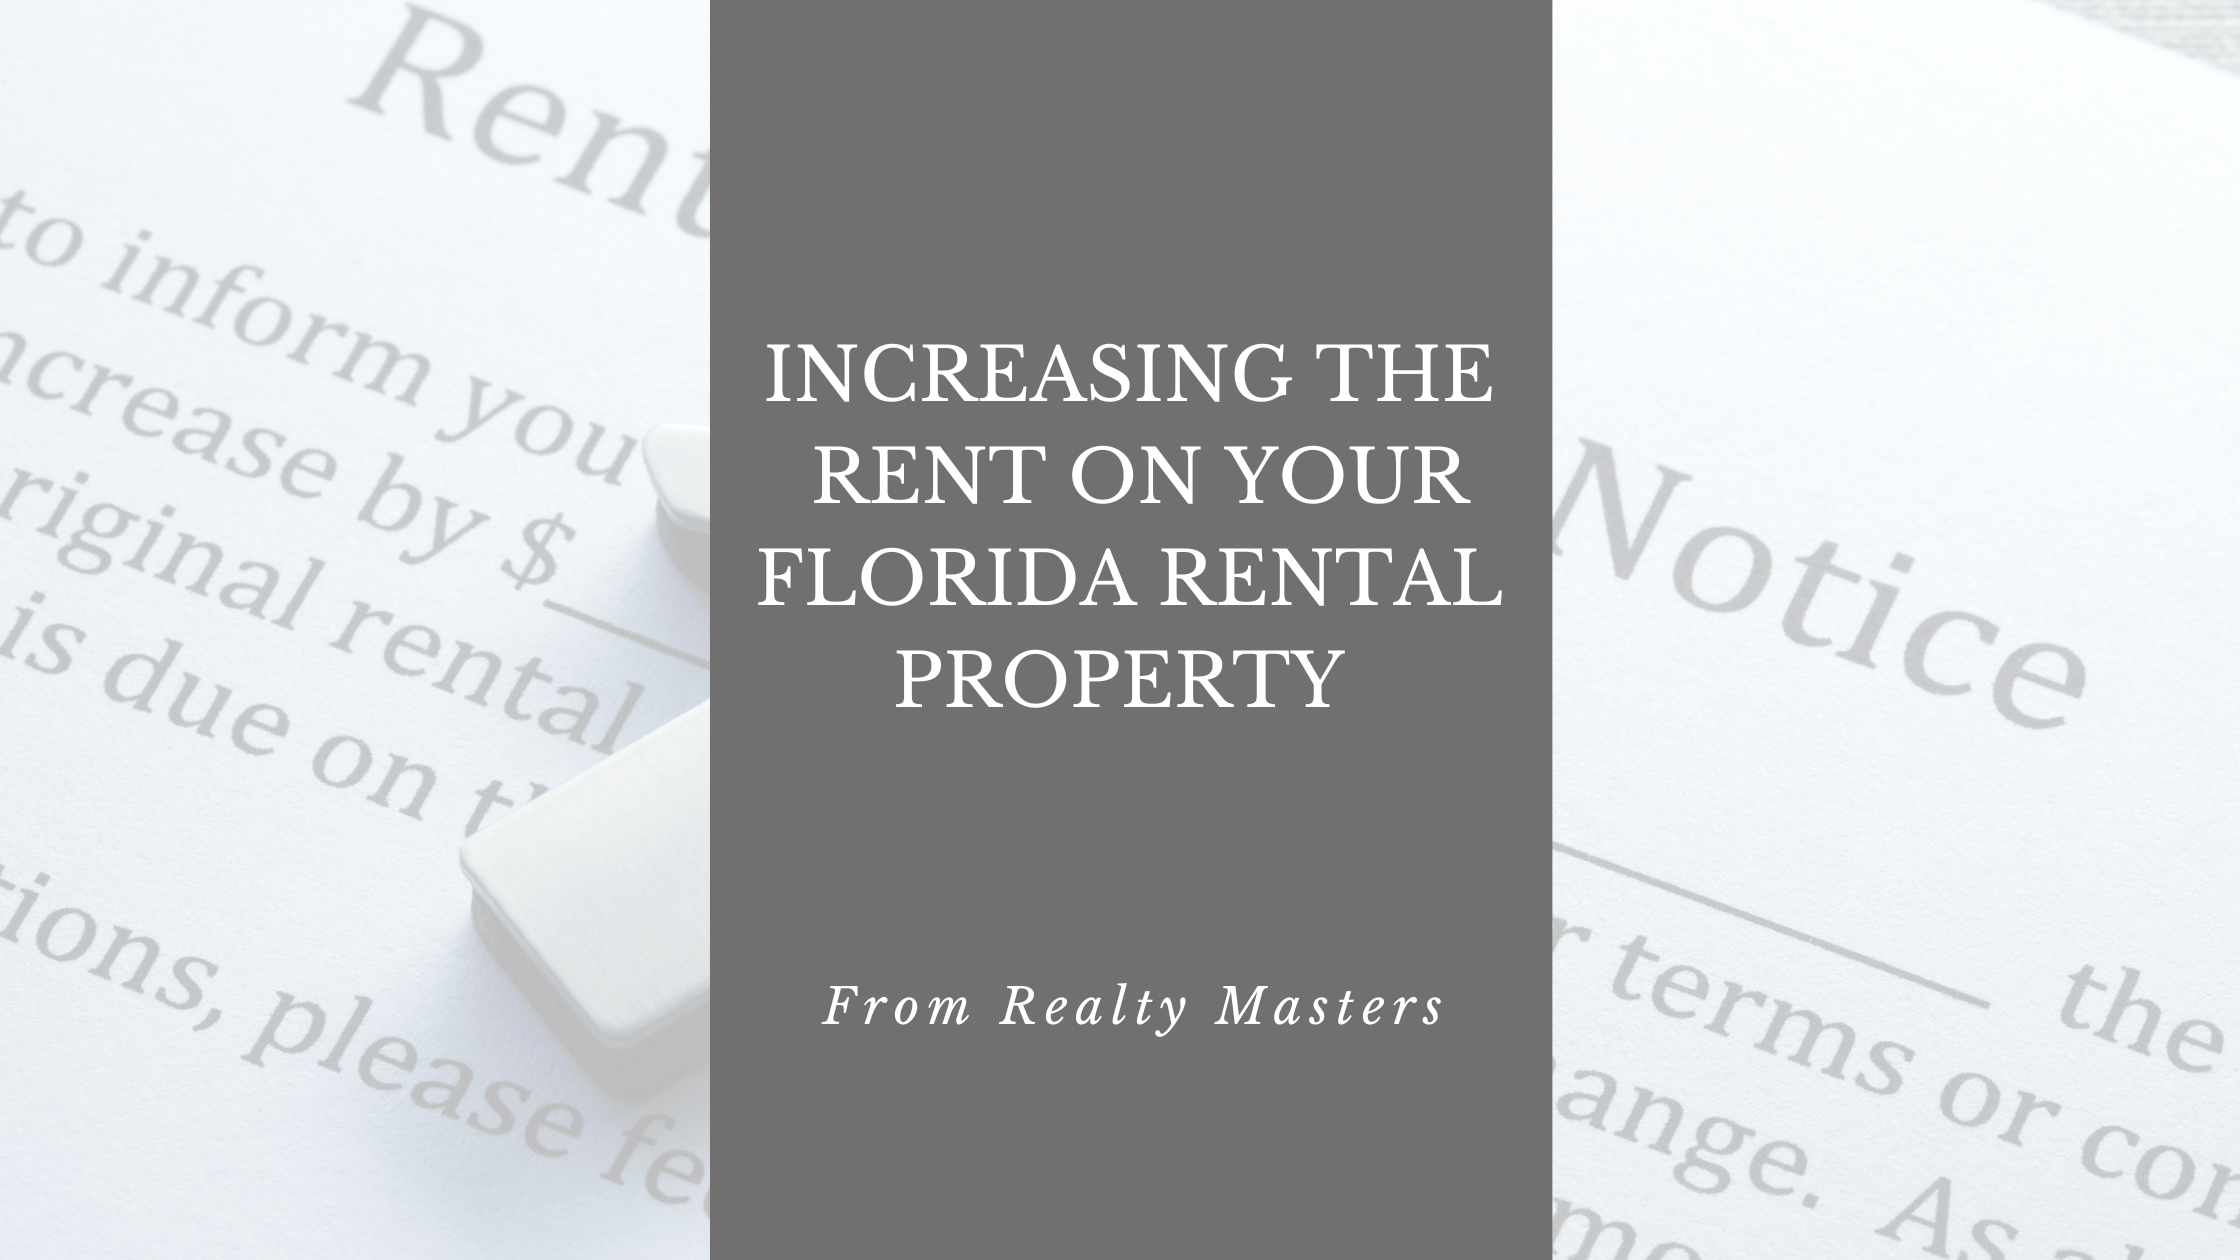 How to Increase the Rent on your Florida Rental Property